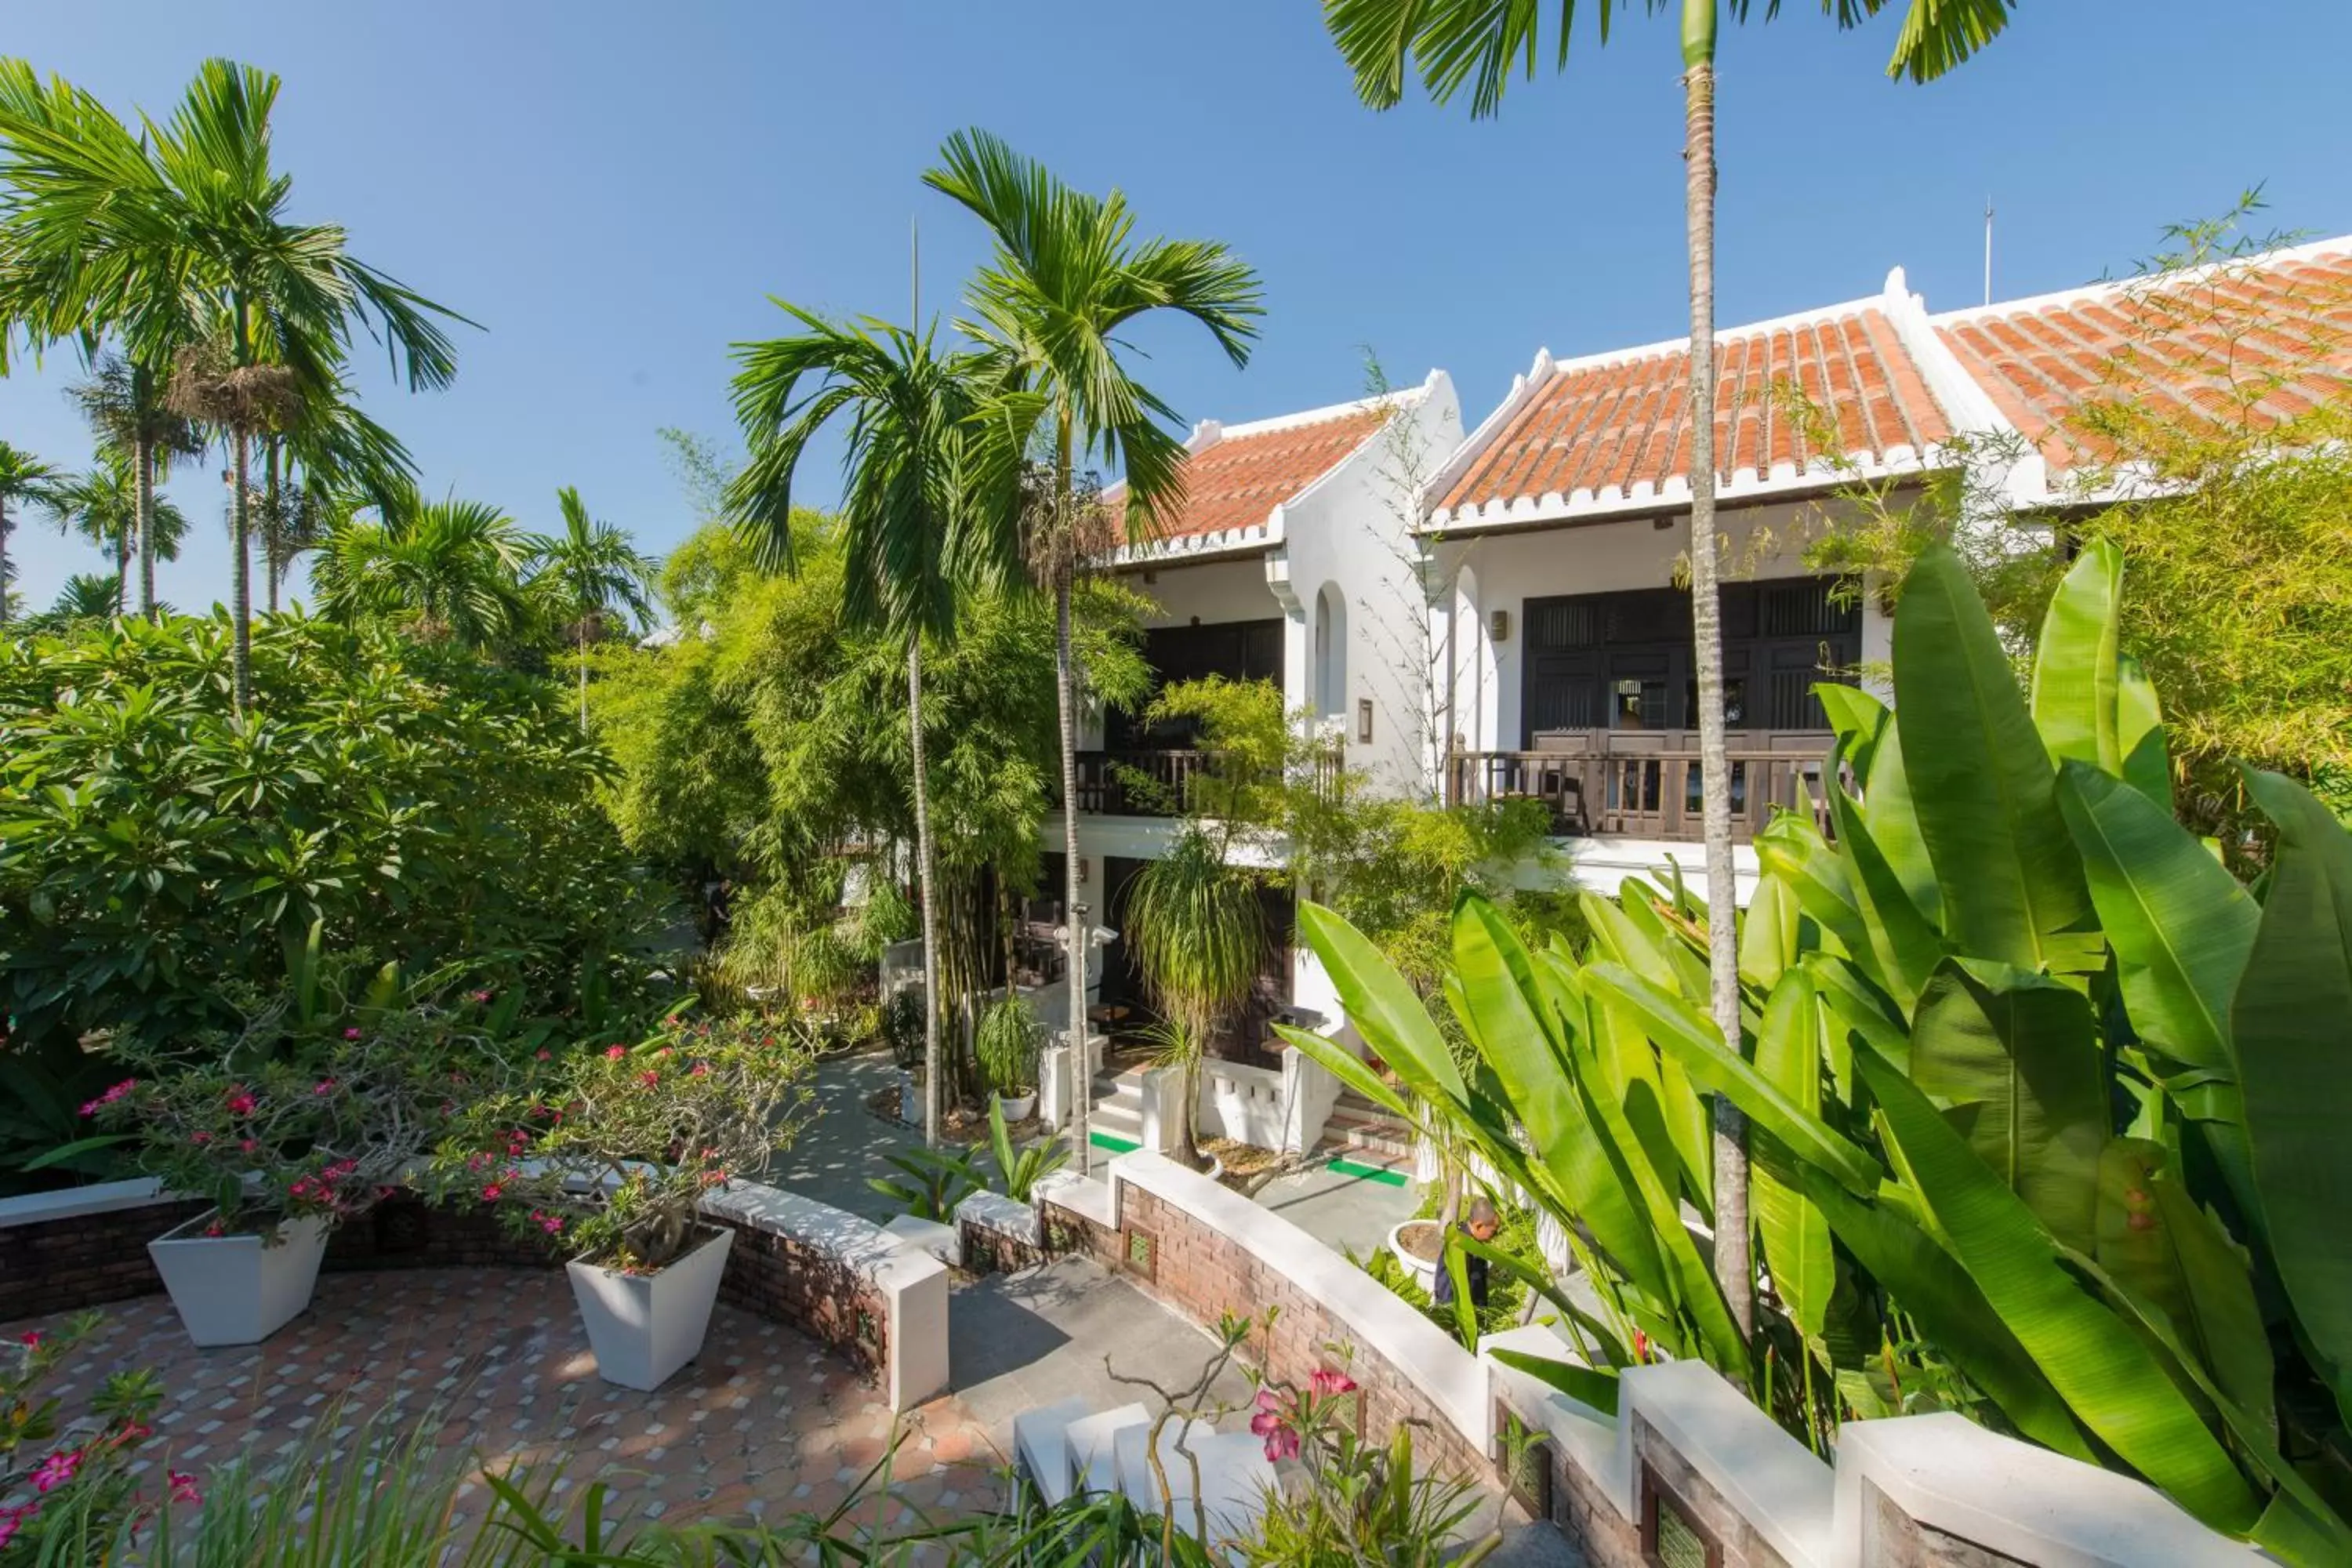 Garden, Property Building in Hoi An Ancient House Resort & Spa